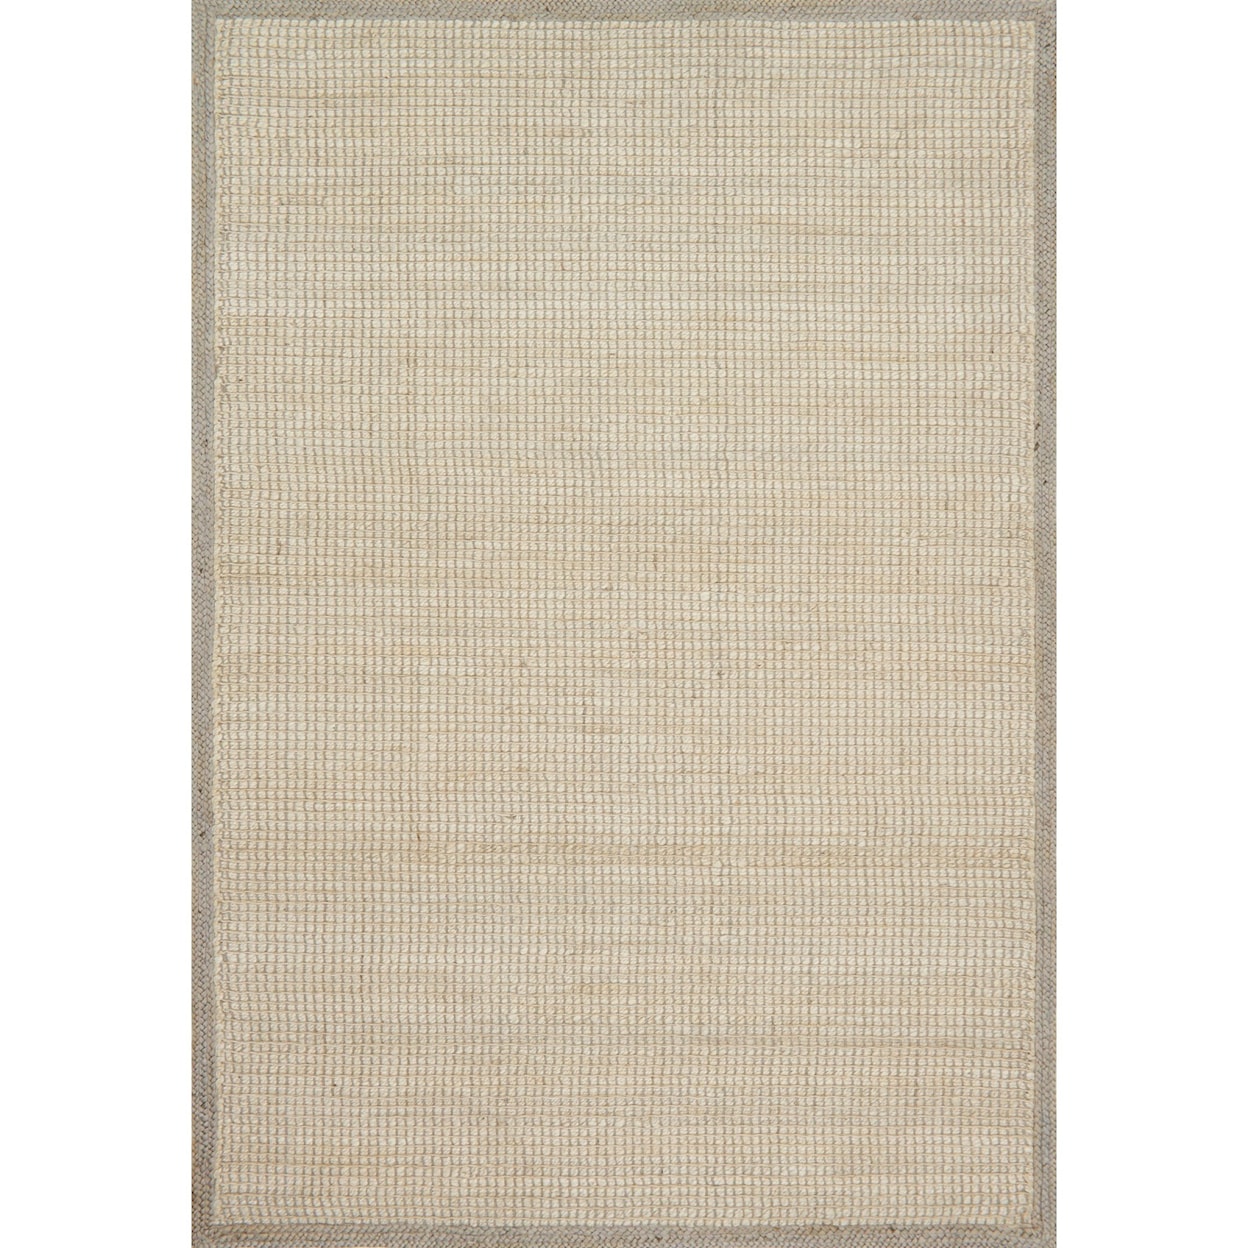 Magnolia Home by Joanna Gaines for Loloi Sydney 3' 6" x 5' 6" Rectangle Rug